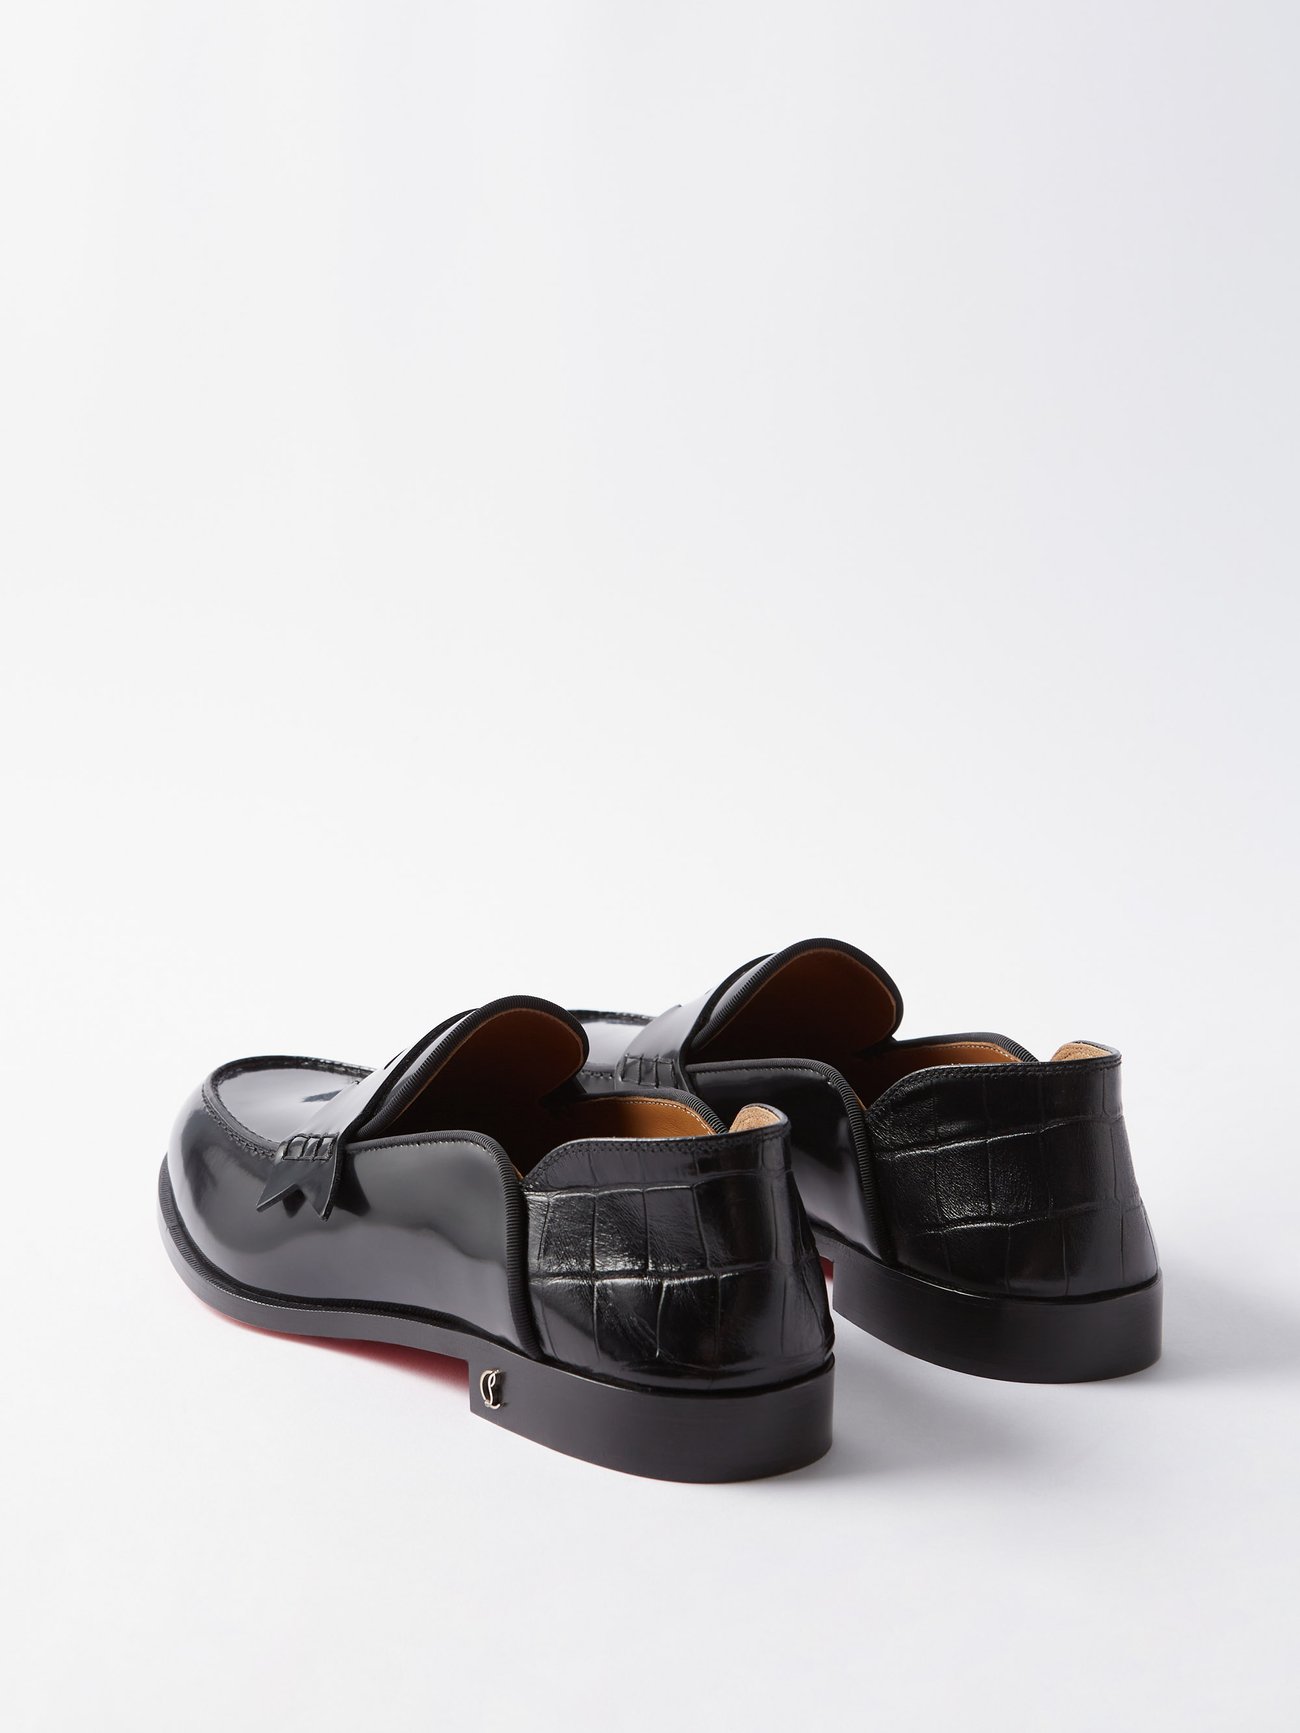 Penny No Back Suede And Croc Effect Loafers in Black - Christian